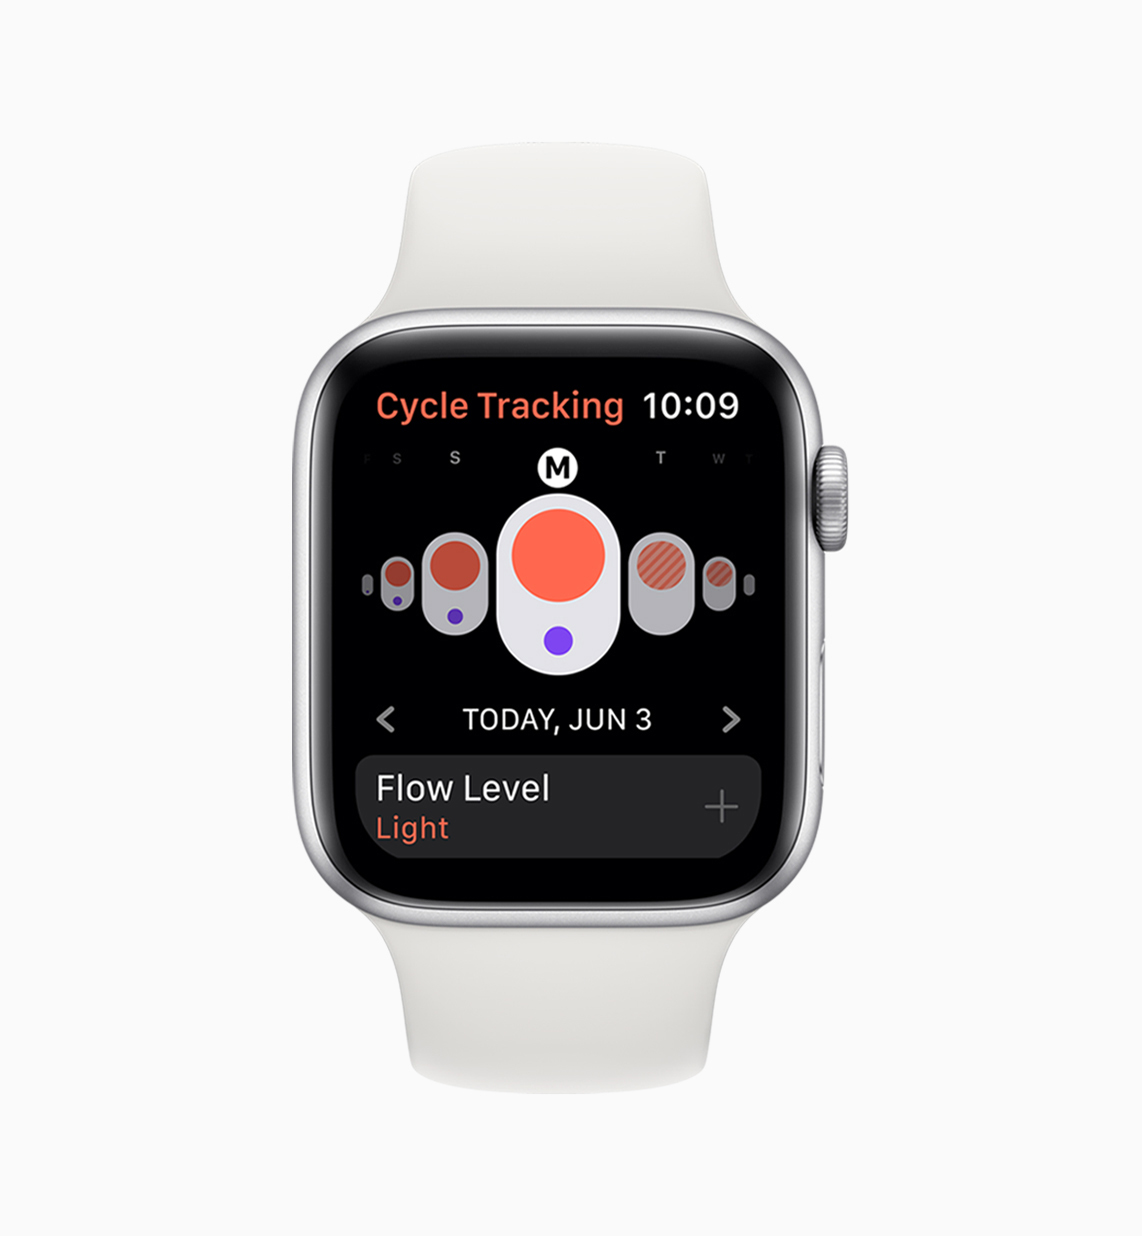 watchOS 6 Adds New Health and Fitness Capabilities, More for Apple Watch